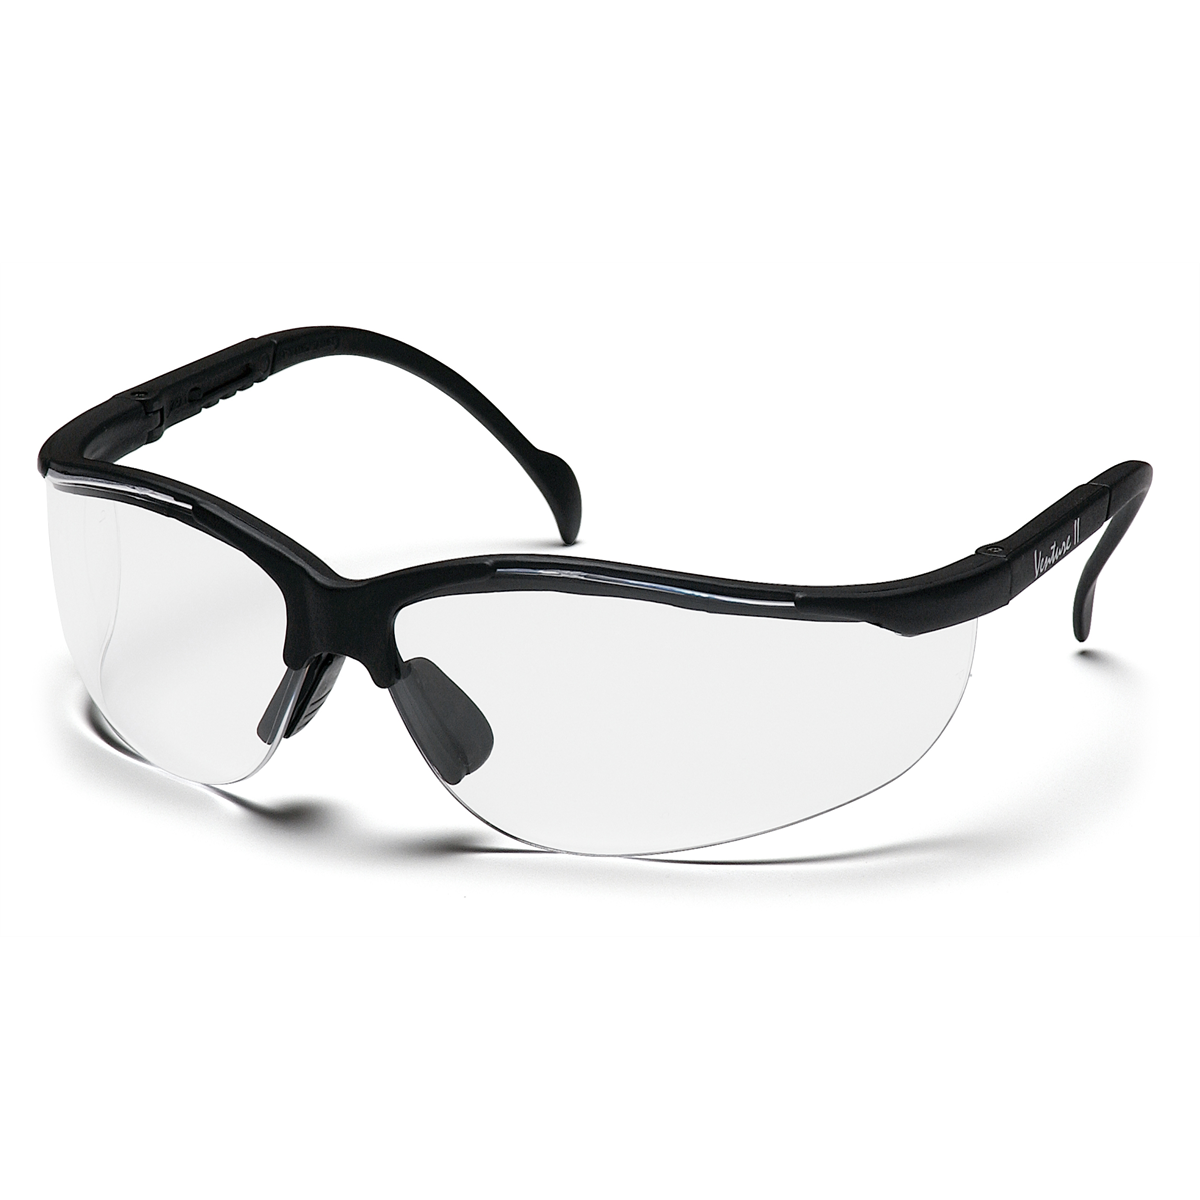 Pyramex Safety - PMXTREME - Black Frame/Clear Lens...